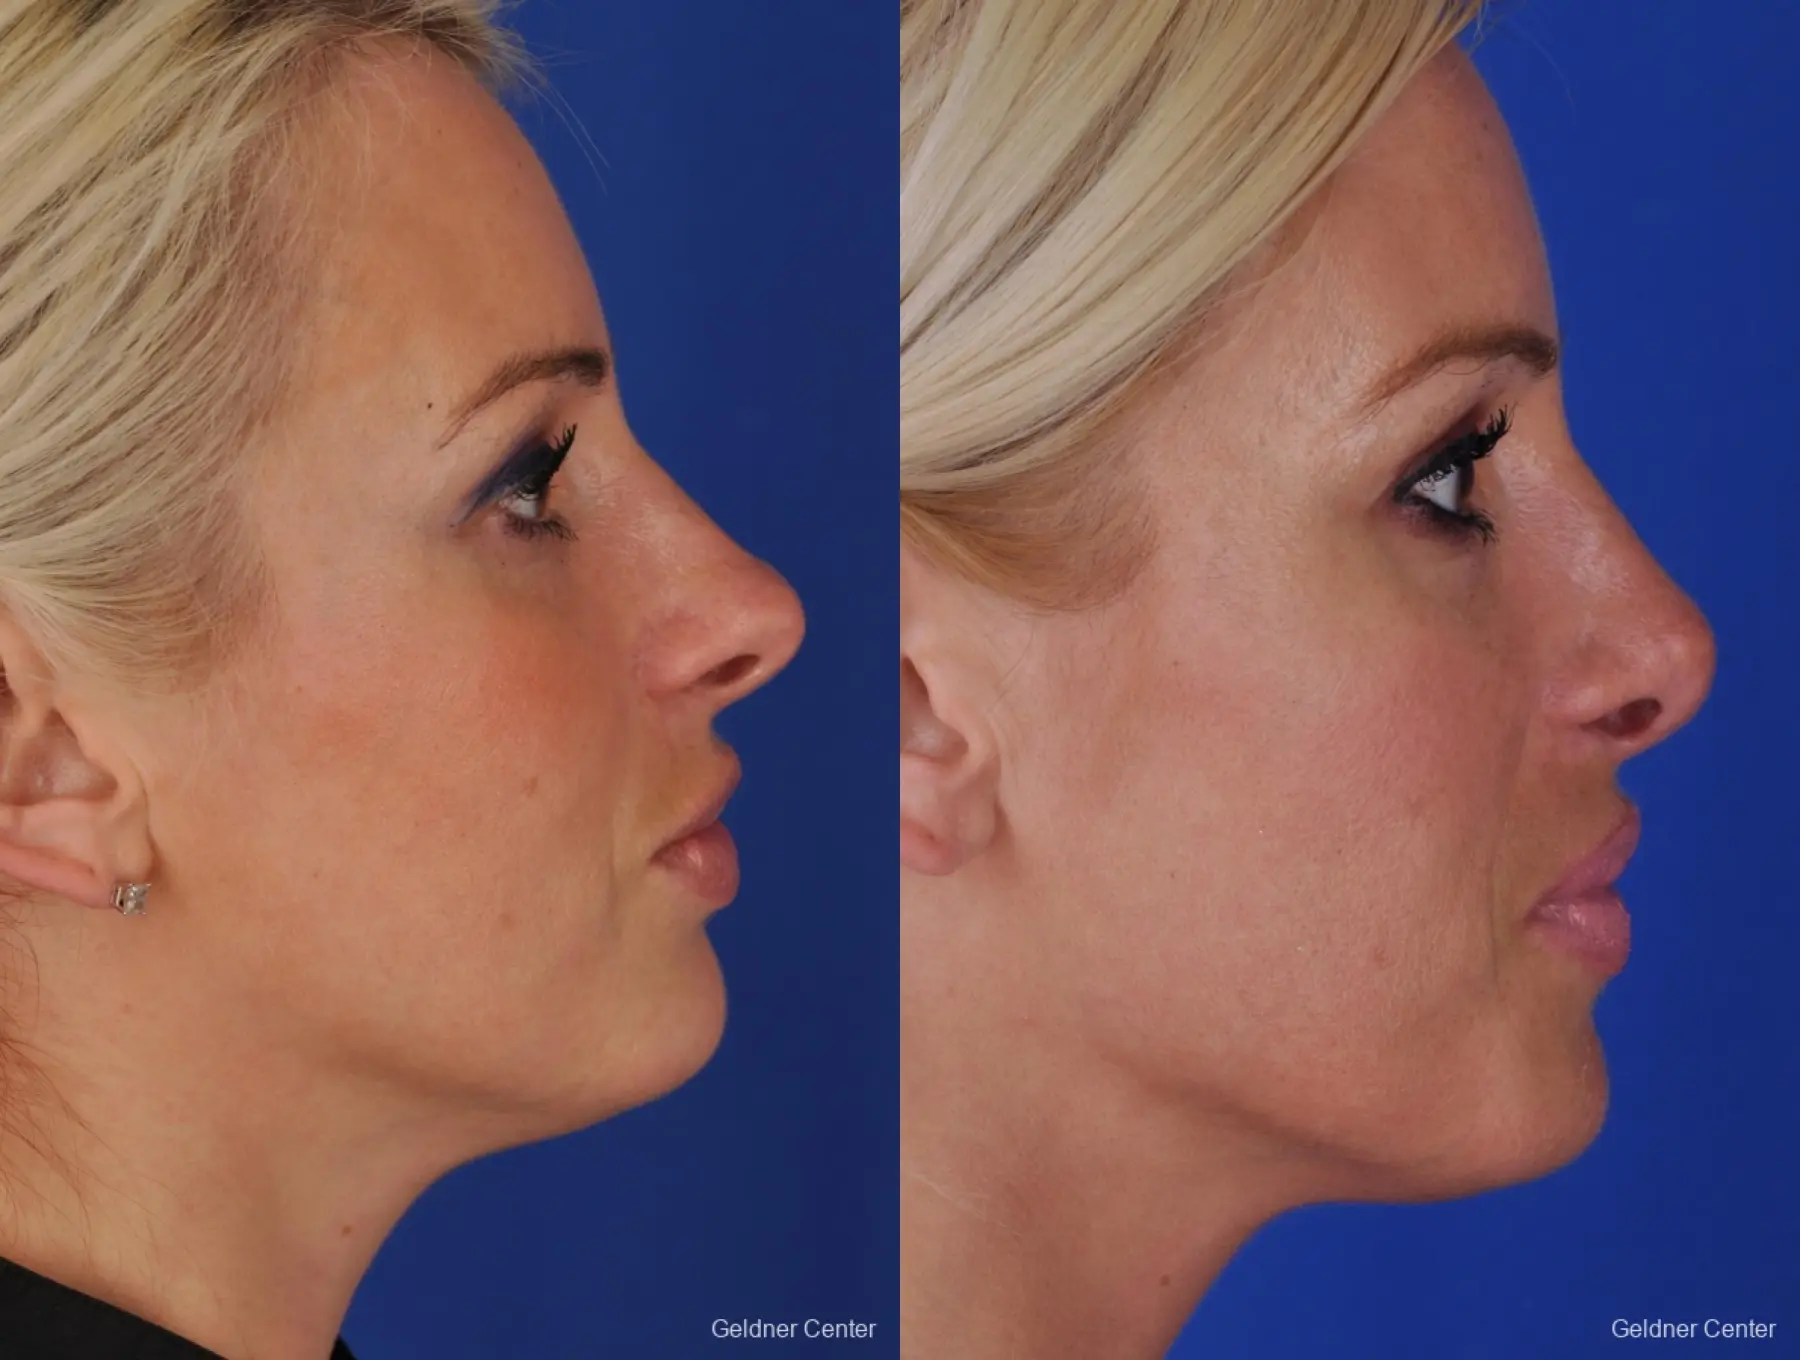 Chicago Rhinoplasty - Before and After 2